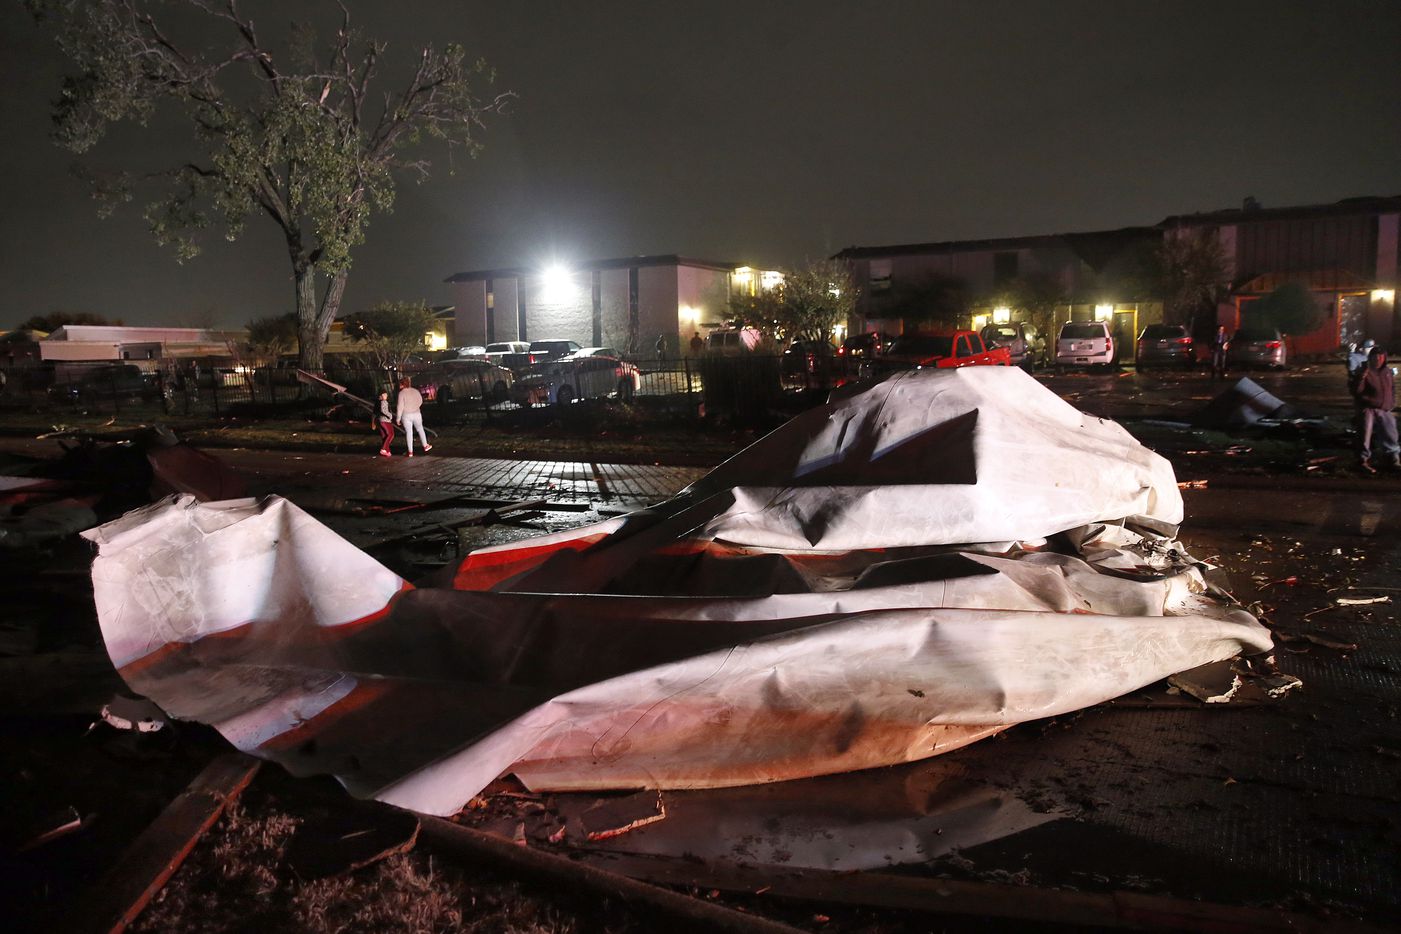 Roofs from The Mirage Apartments complex were torn off and landed on Pioneer Parkway in Arlington following a tornado-warned storm, Tuesday night, November 24, 2020. Air conditioner units and other structural debris were scattered across the property.